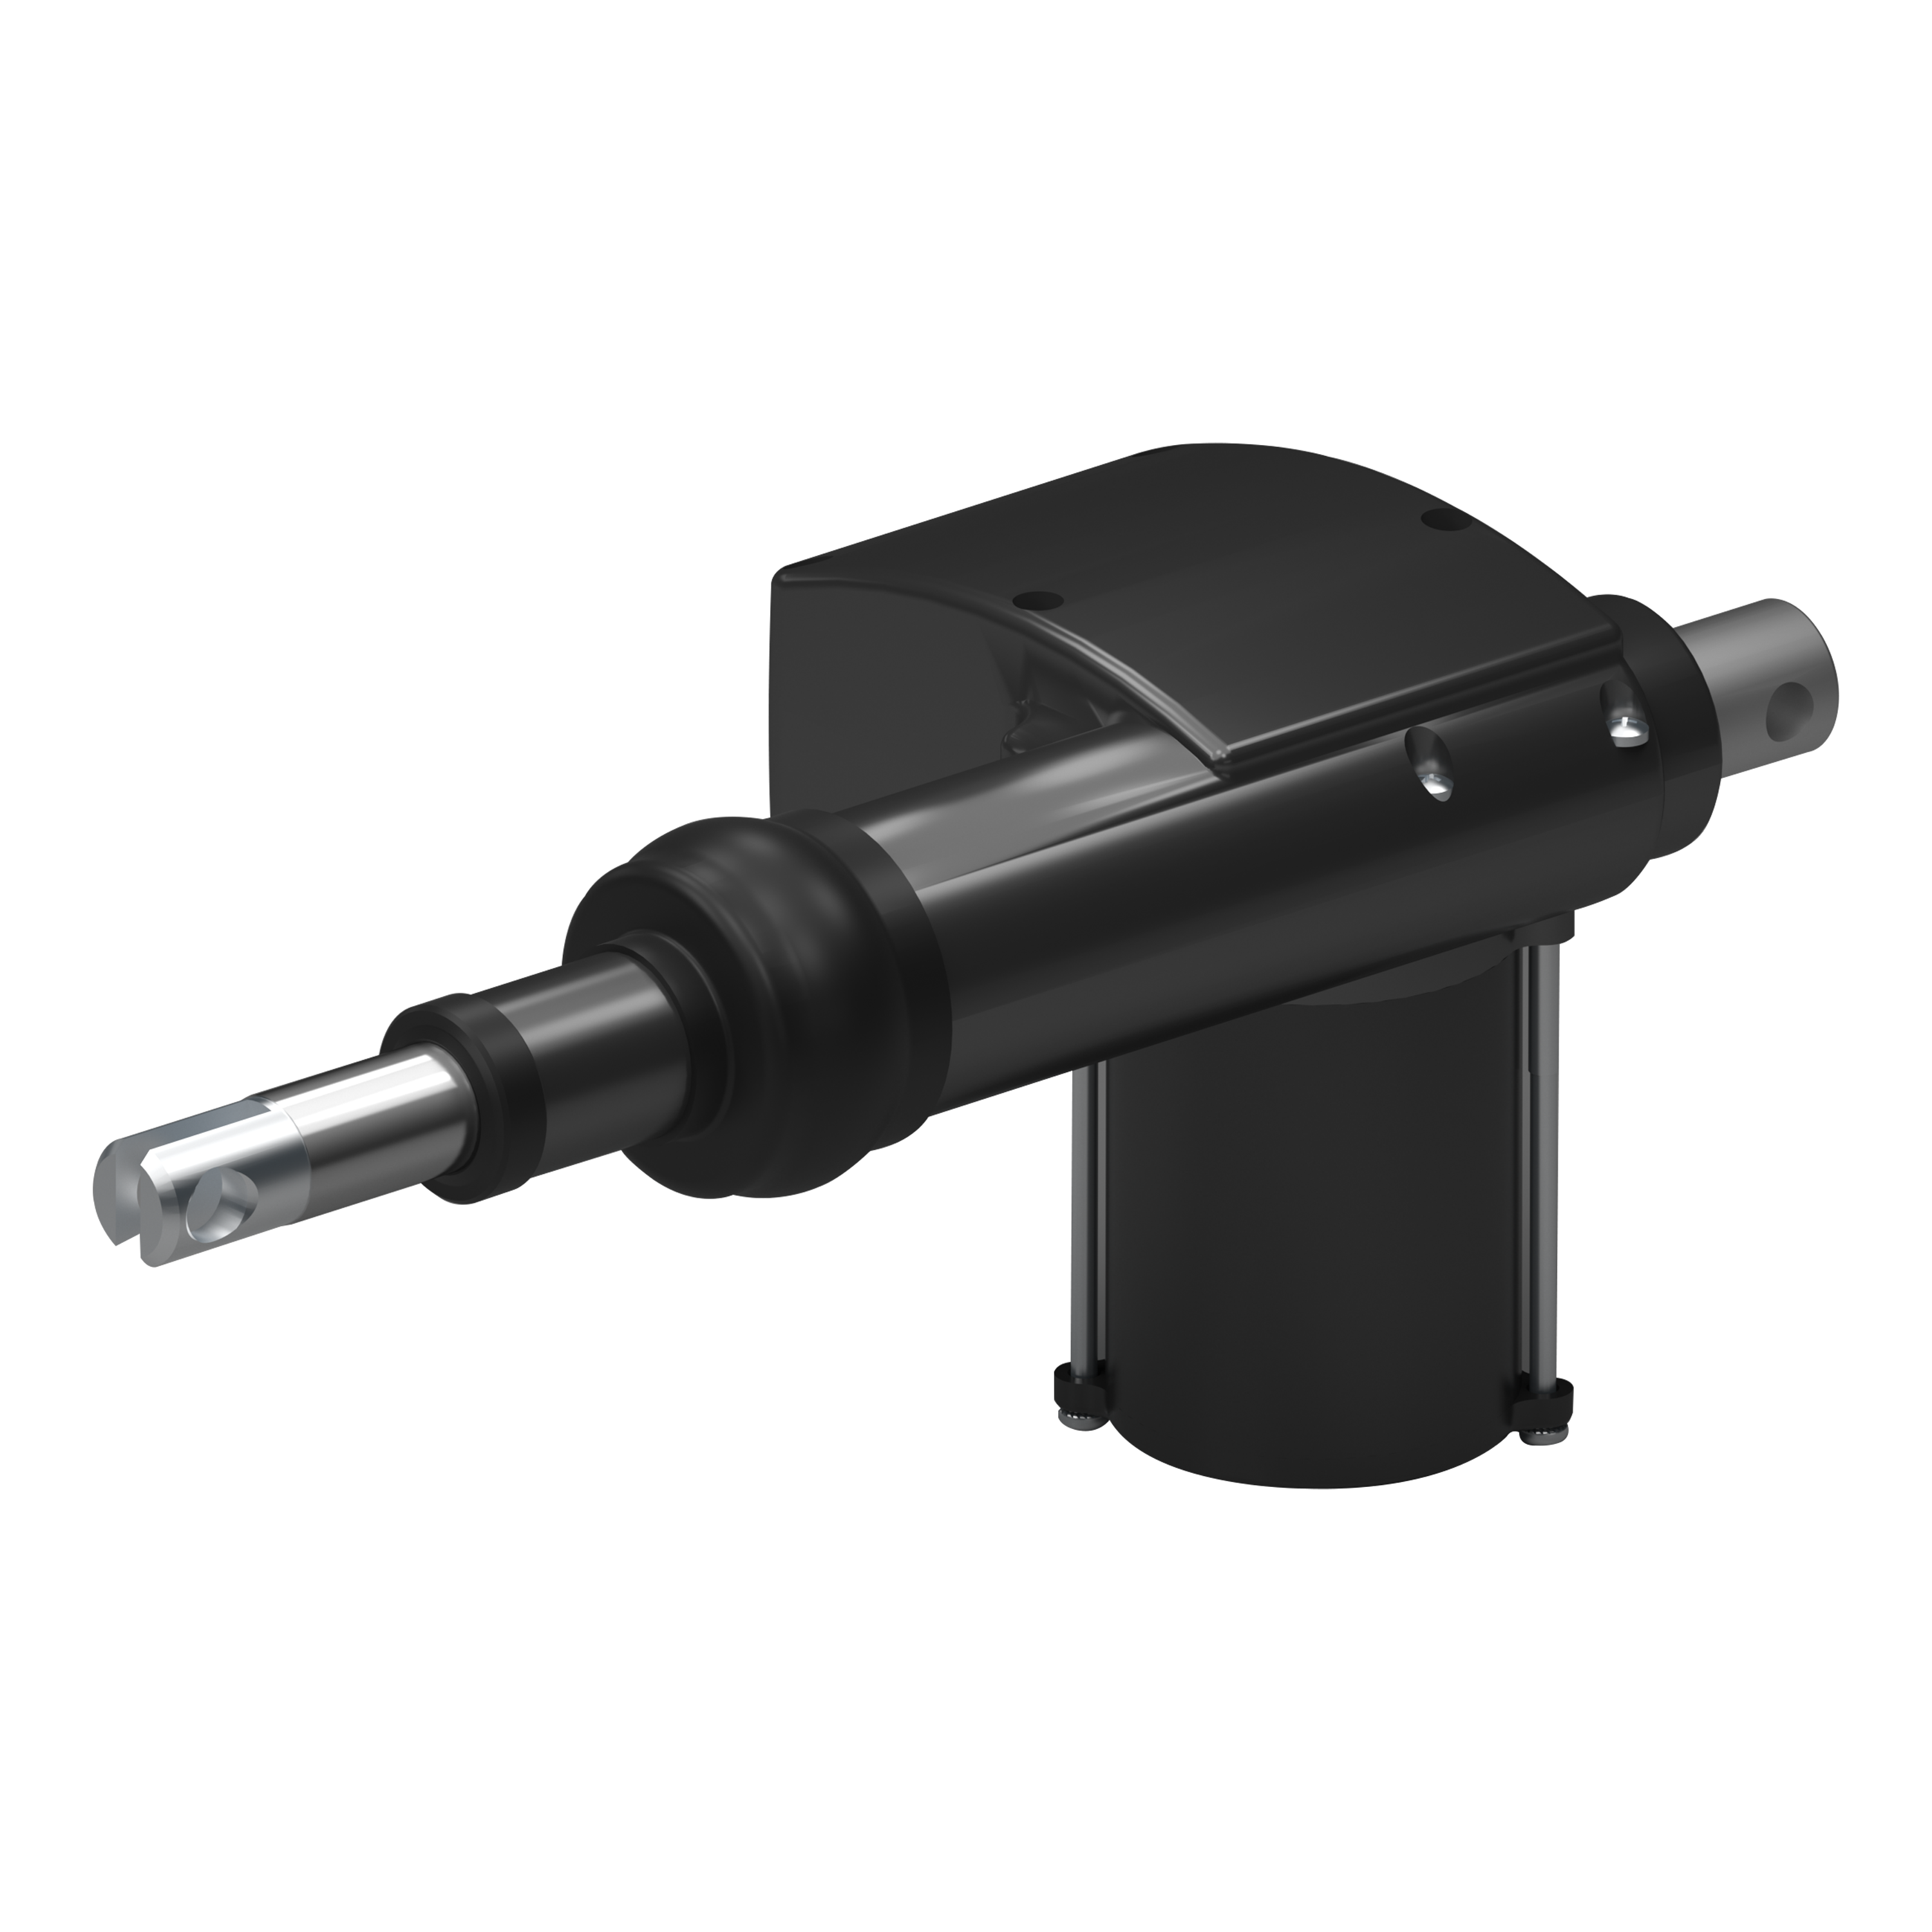 110 Volt Linear Actuator: The Future of Automation